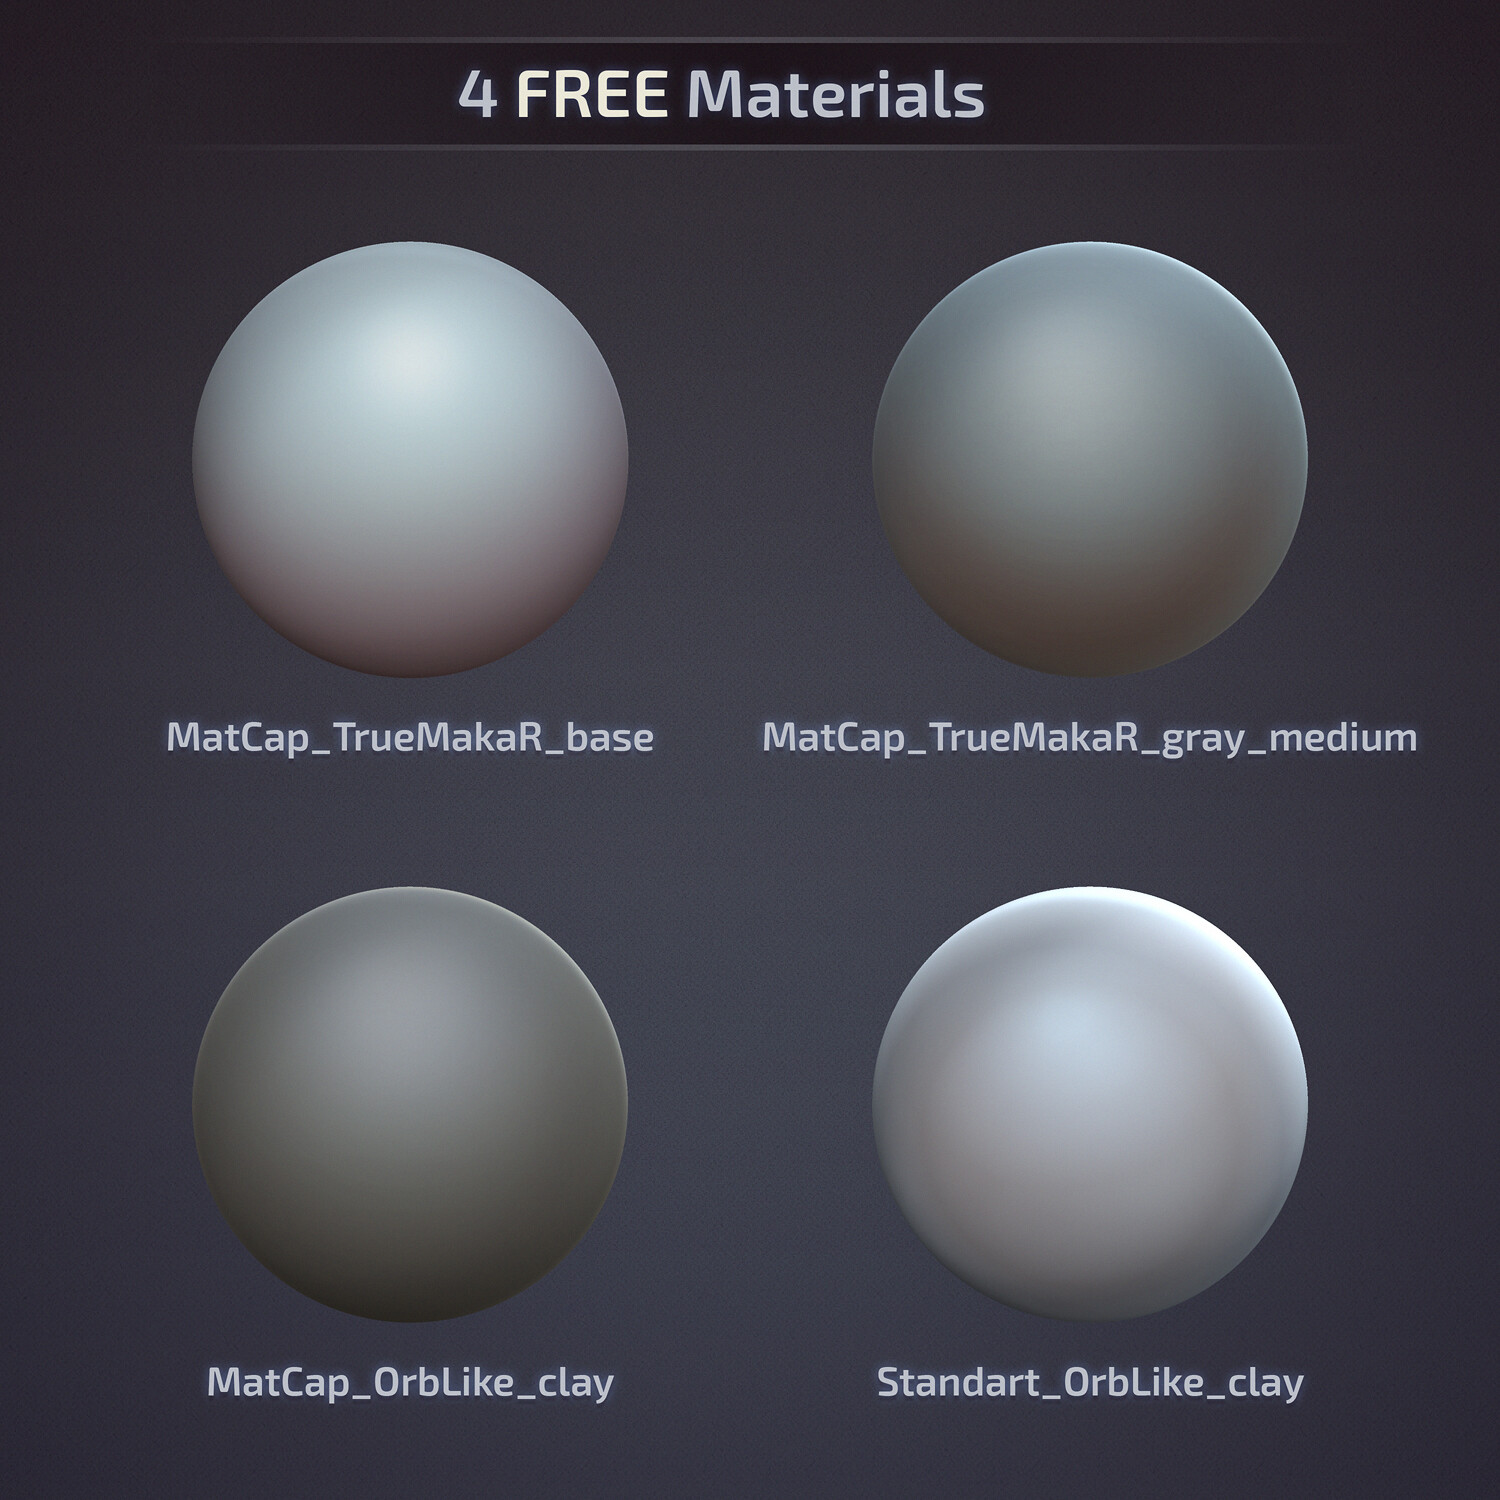 pluralsight materials and rendering in zbrush 3.1